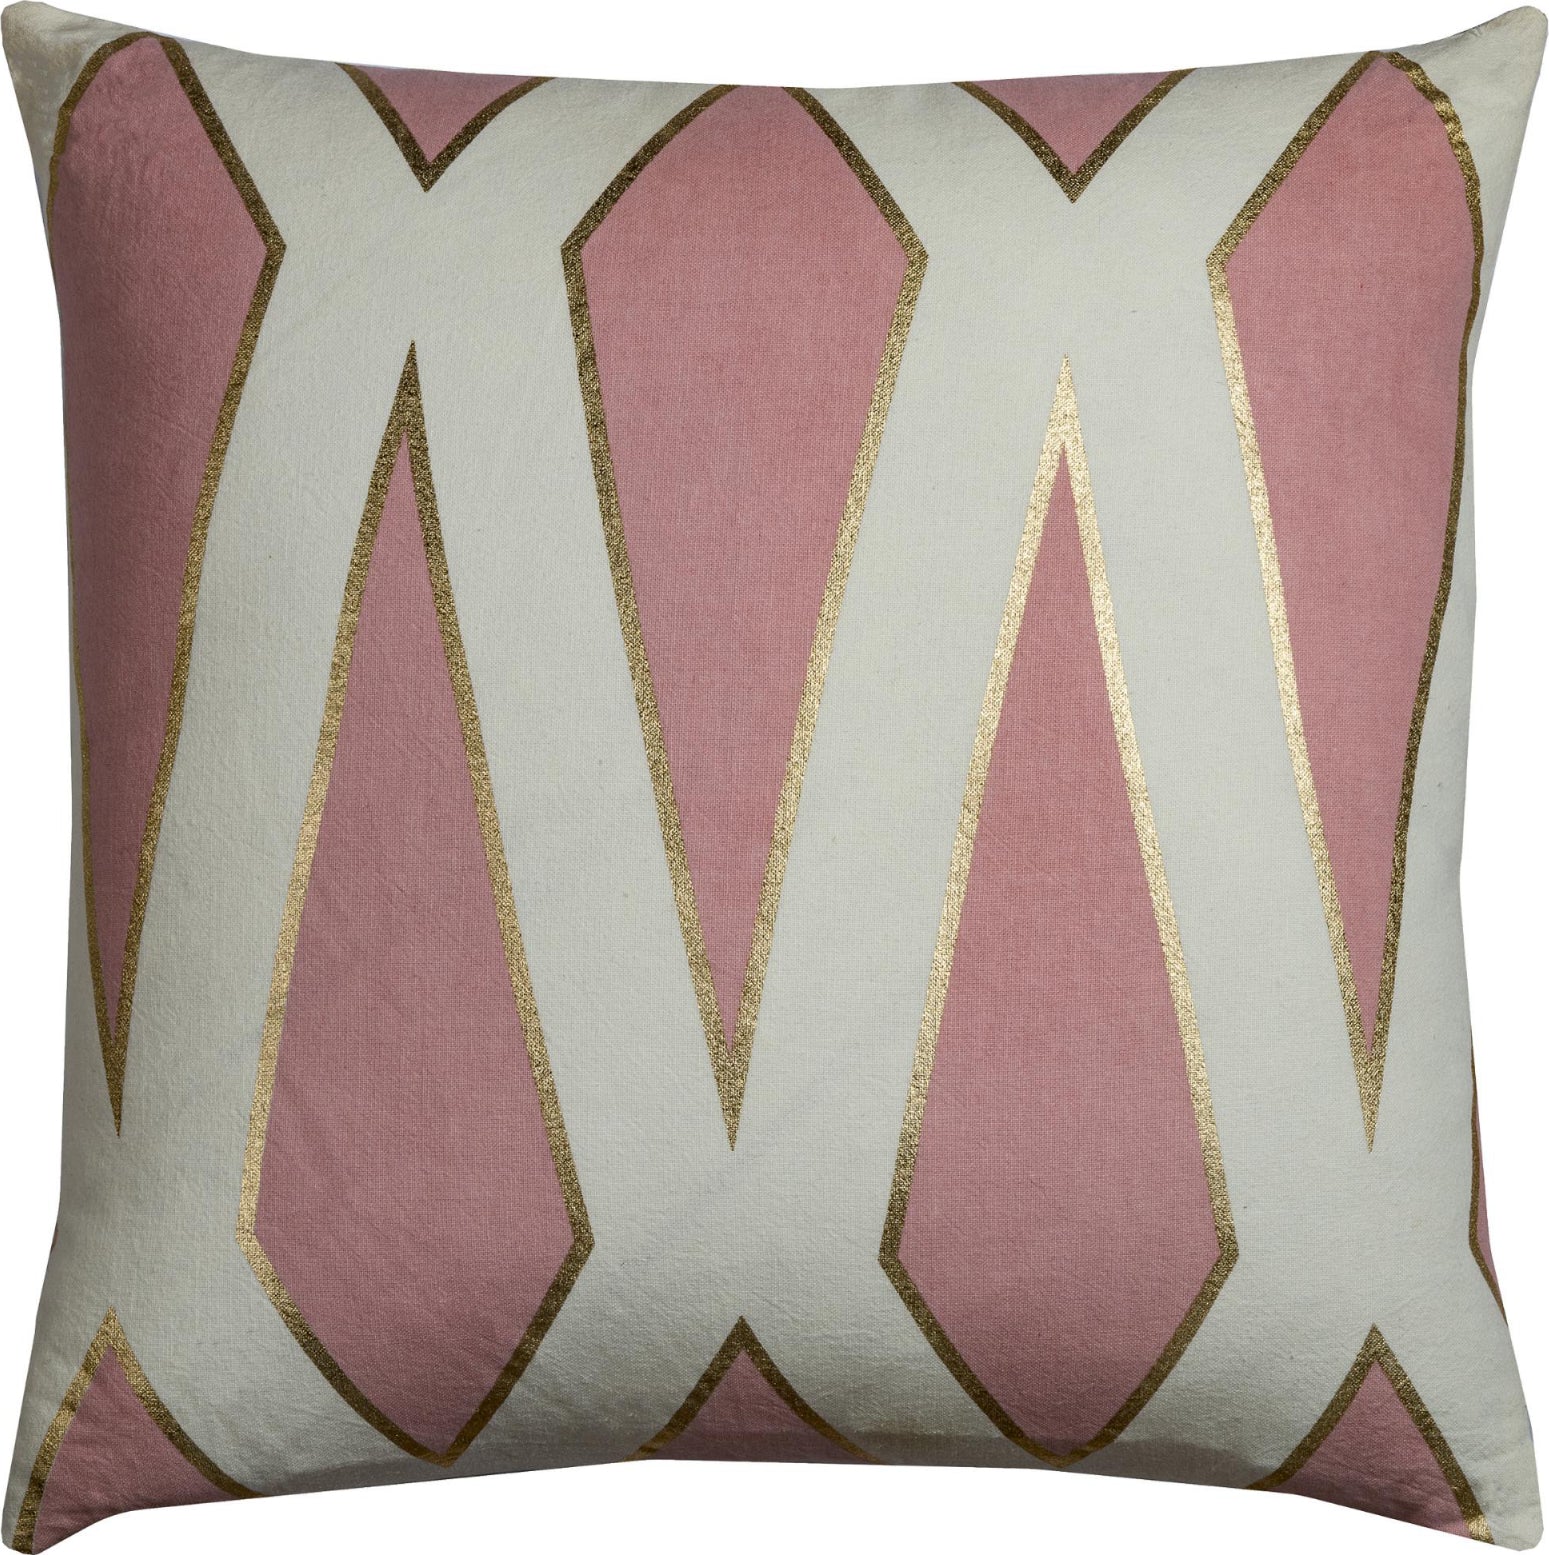 Rizzy Pillows T10539 Pink by Rachel Kate